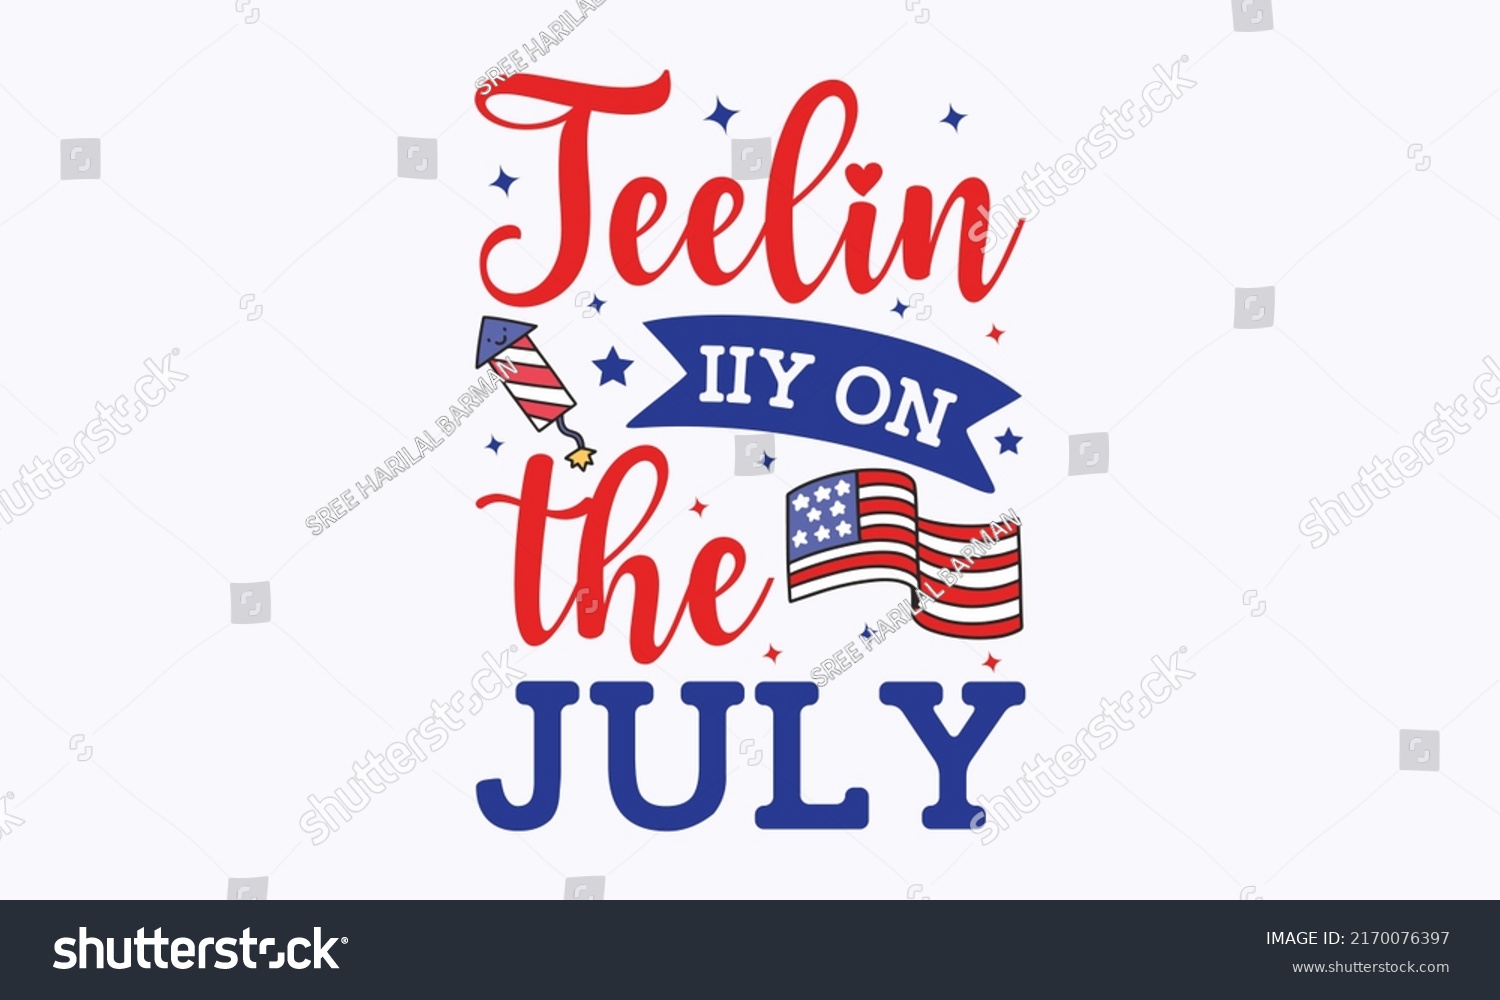 SVG of teelin iiy on the july -  4th of July fireworks svg for design shirt and scrapbooking. Good for advertising, poster, announcement, invitation, Templet svg